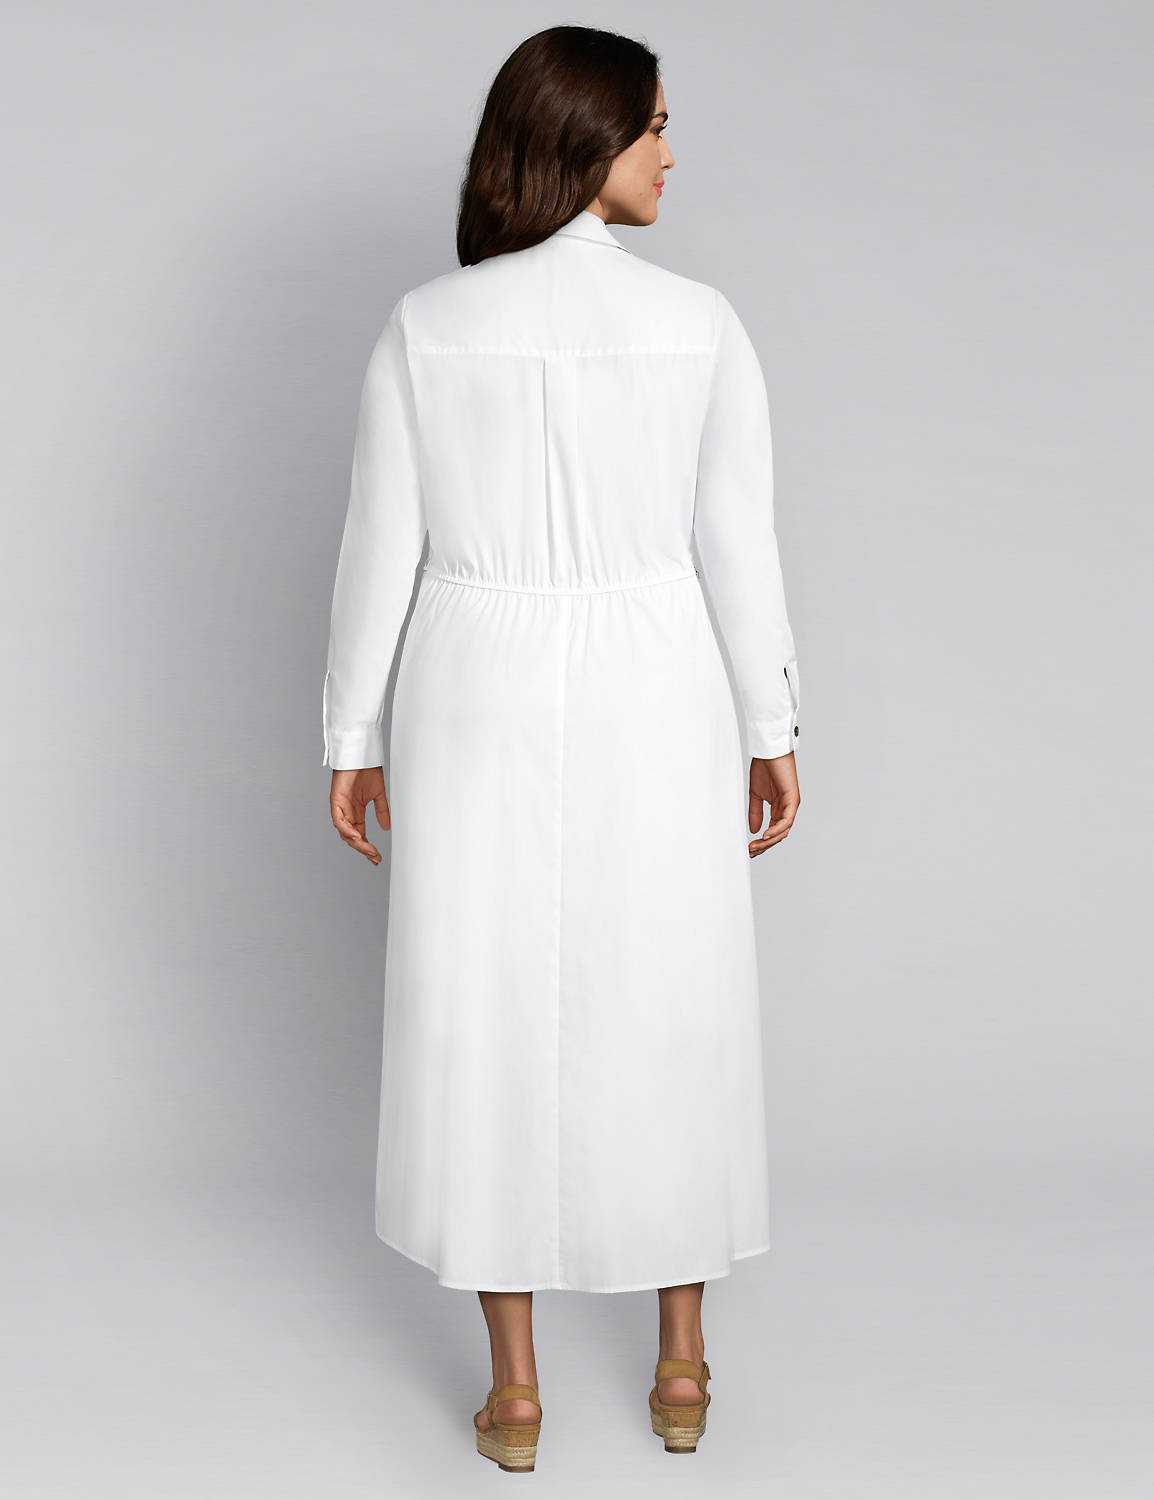 1113444 ROLL-UP LS SHIRT DRESS:White 2008:12 Product Image 2